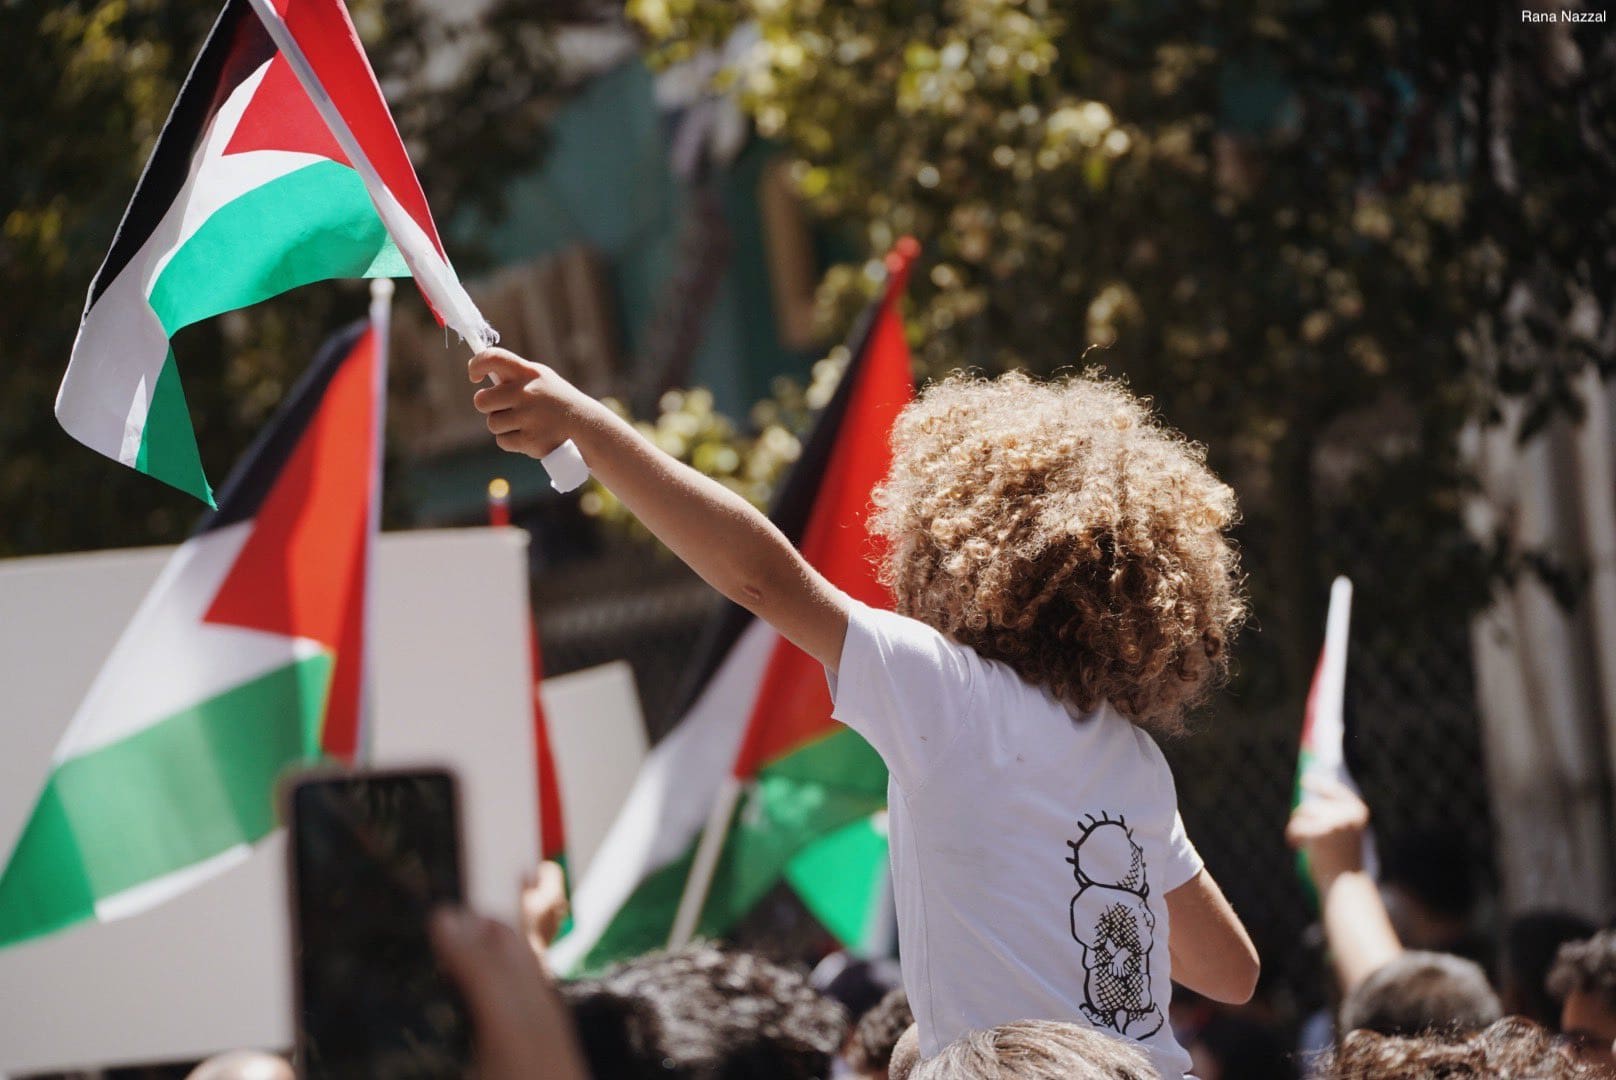 Article - Defying Fragmentation and the Significance of Unity: A New Palestinian Uprising